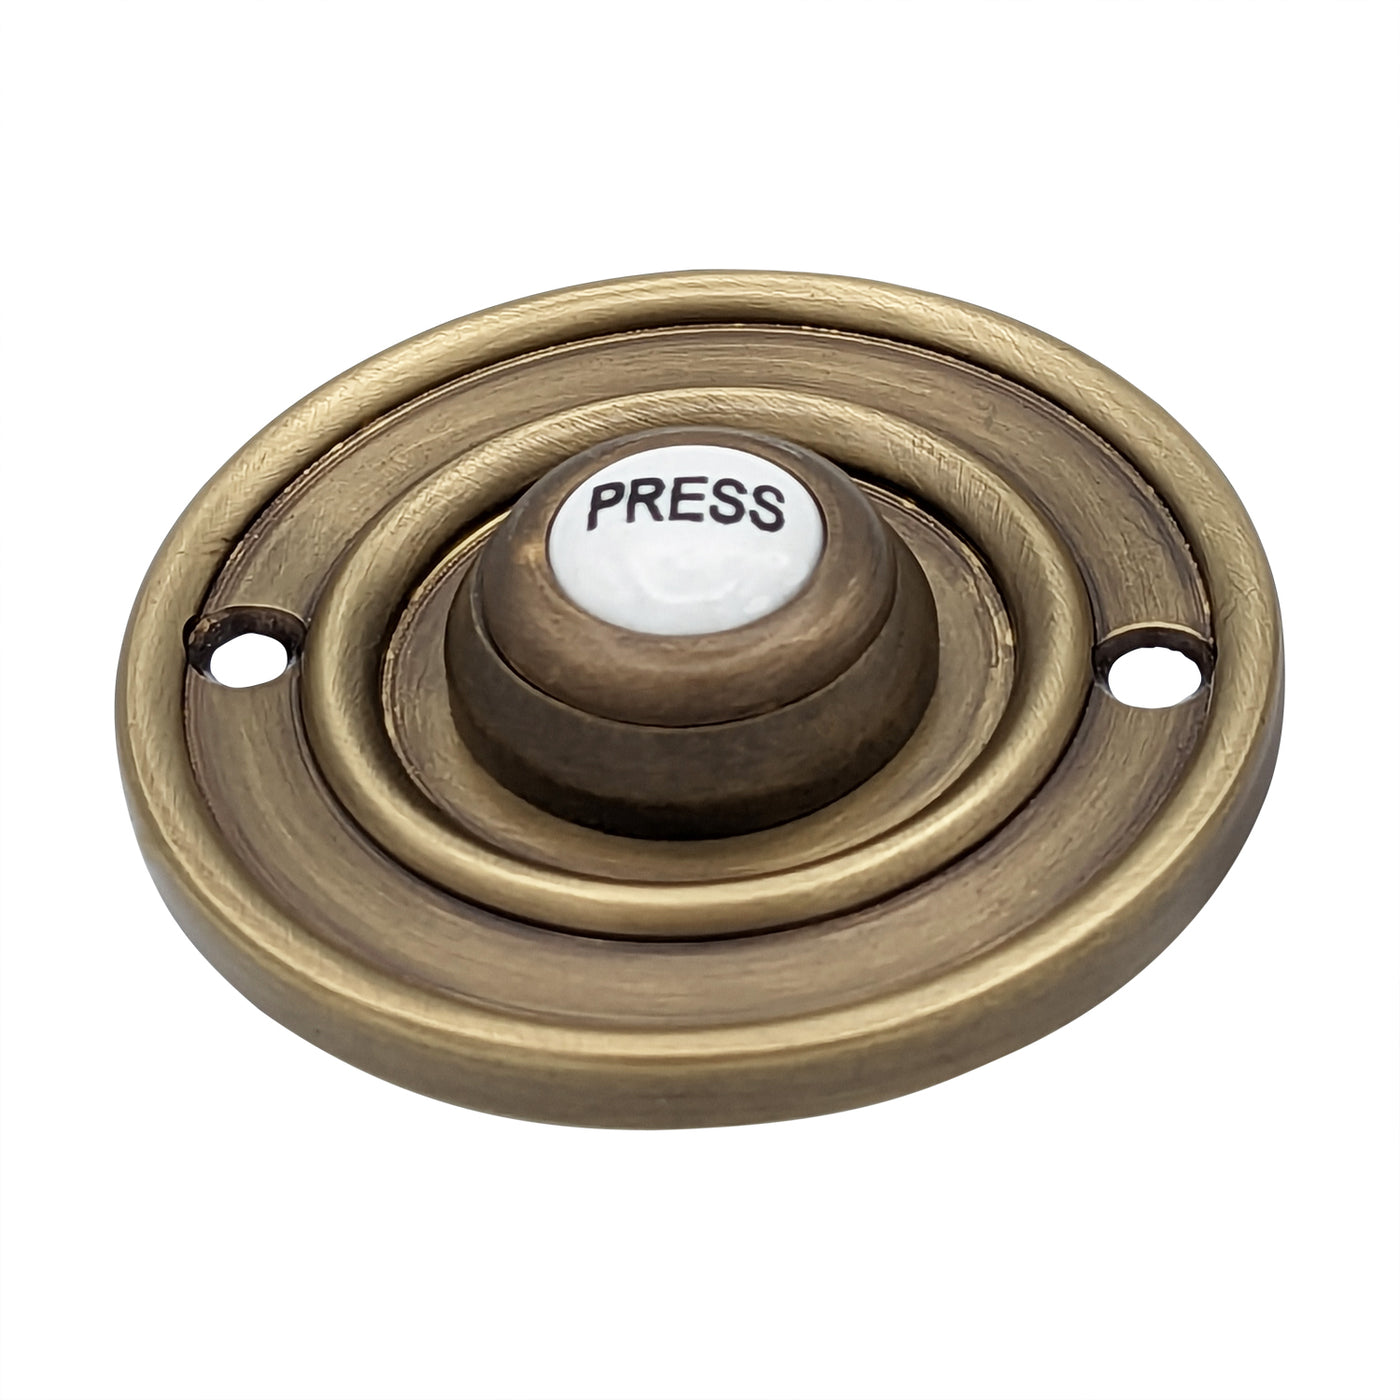 2 1/3 Inch Solid Brass Porcelain "Press" Doorbell Button (Several Finishes Available)